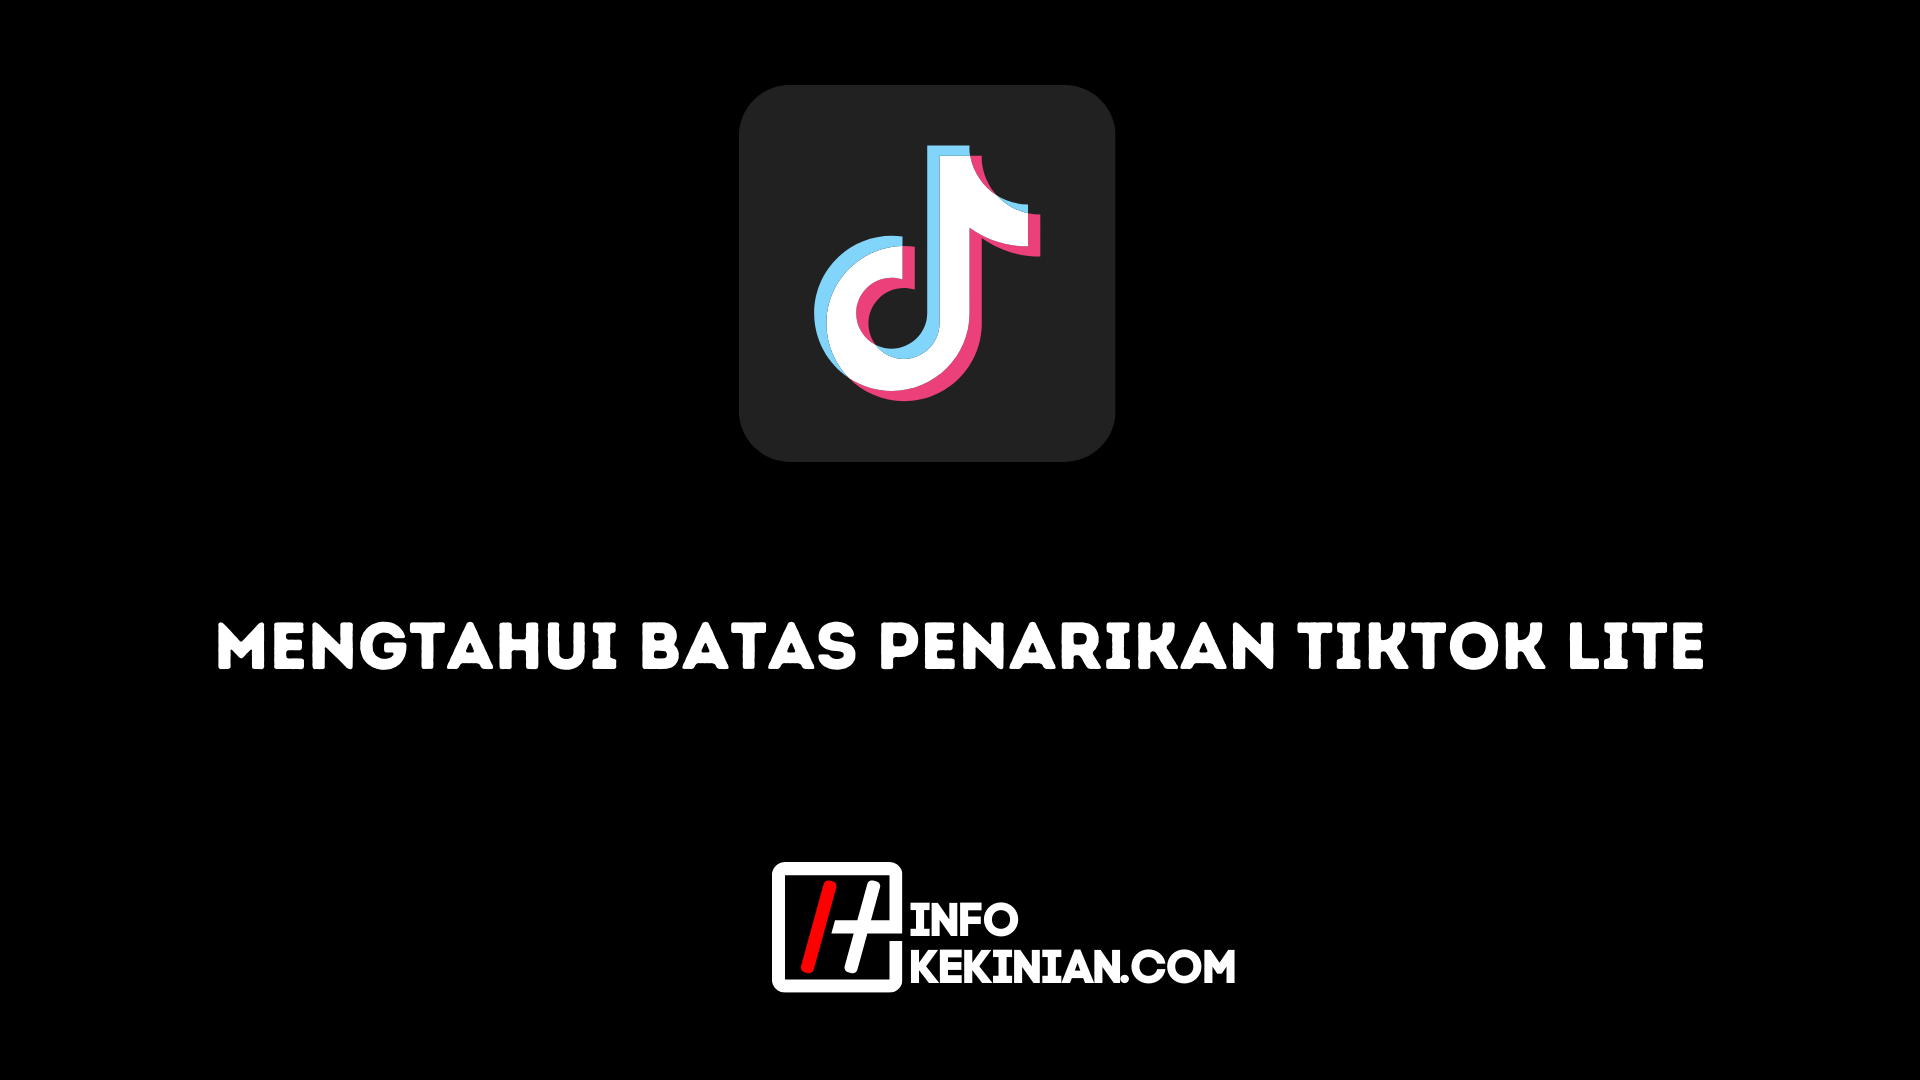 Knowing the Withdrawal Limits of TikTok Lite